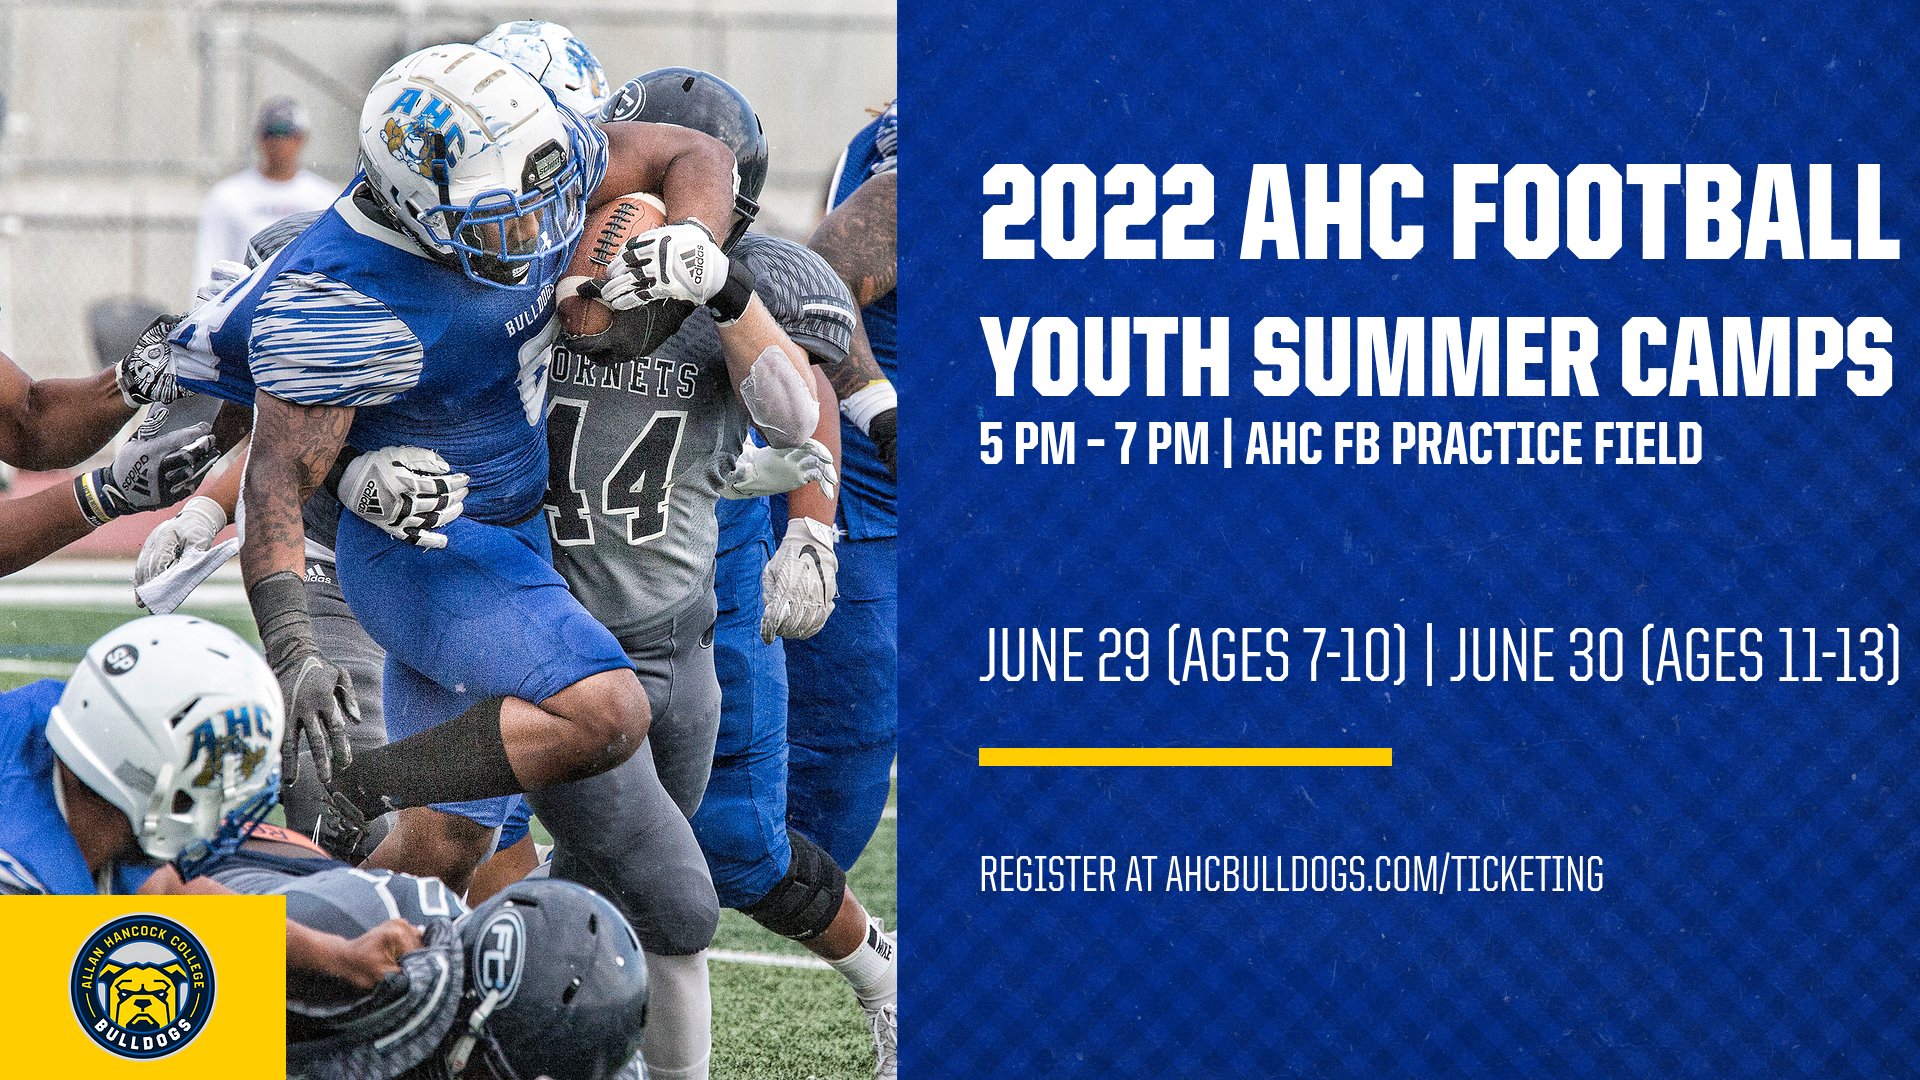 Football Announces Youth Summer Camp Dates